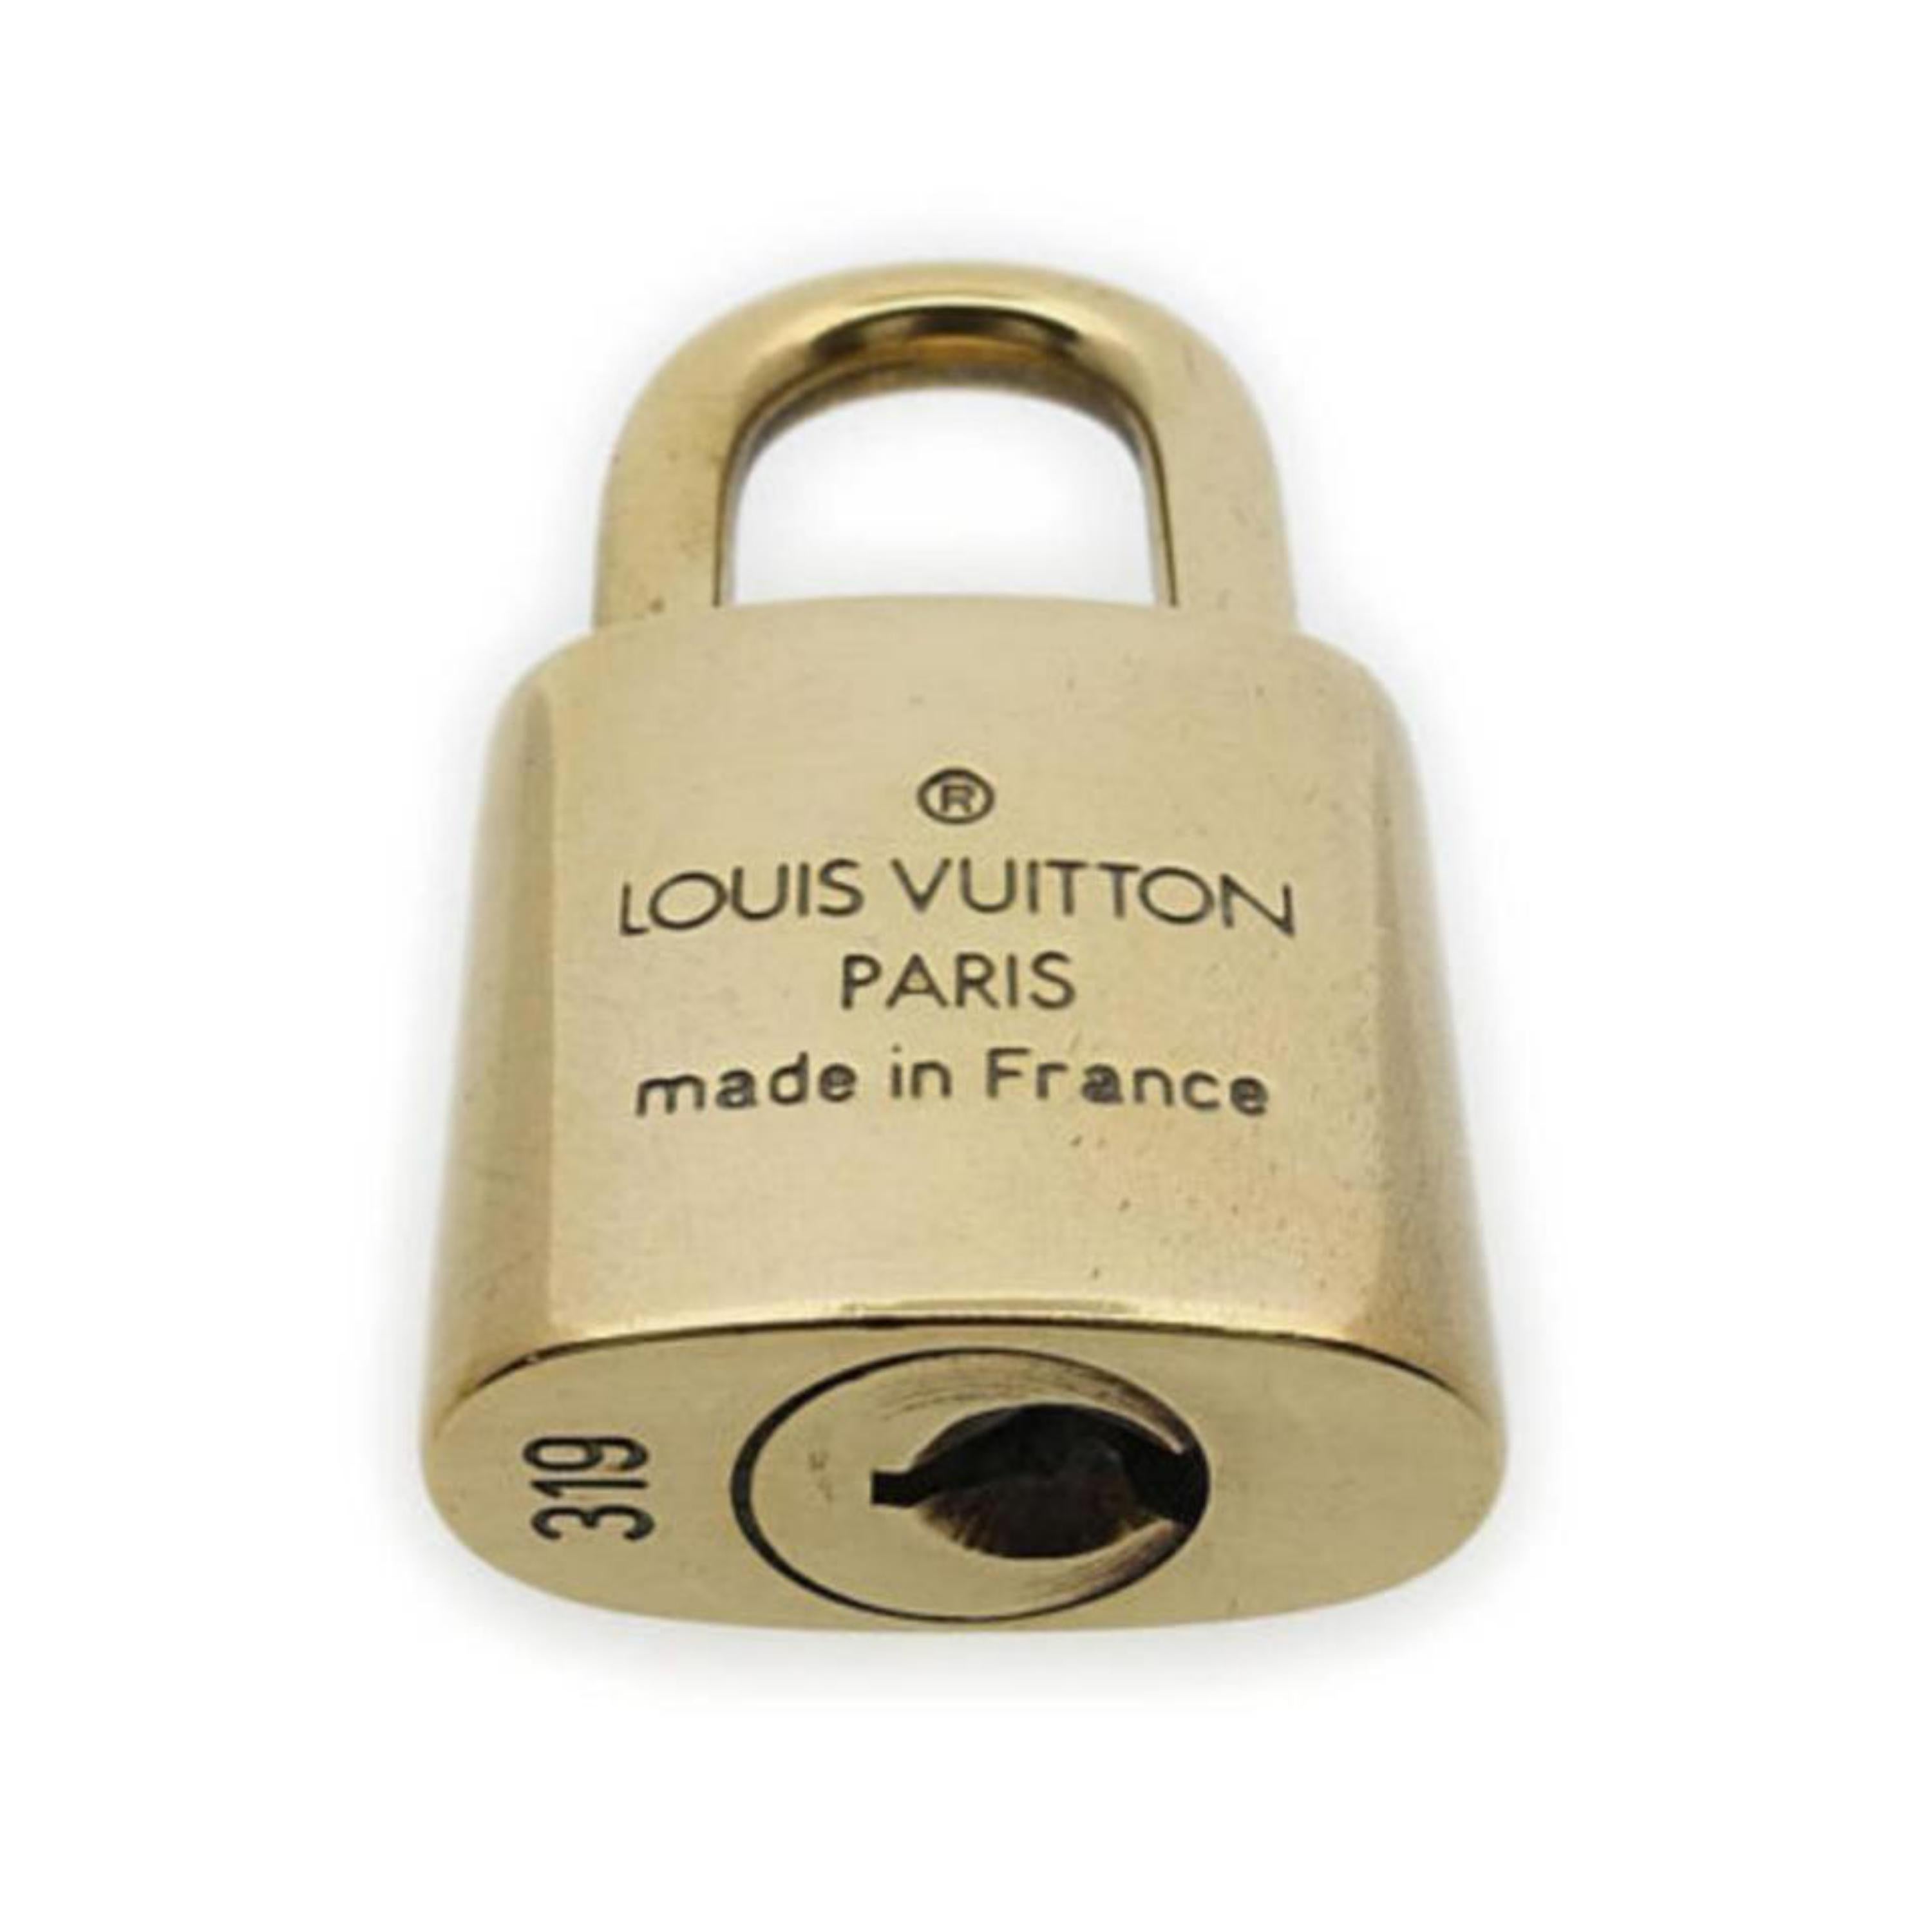 Louis Vuitton Gold Single Key Lock Pad Lock and Key 867695 For Sale 1